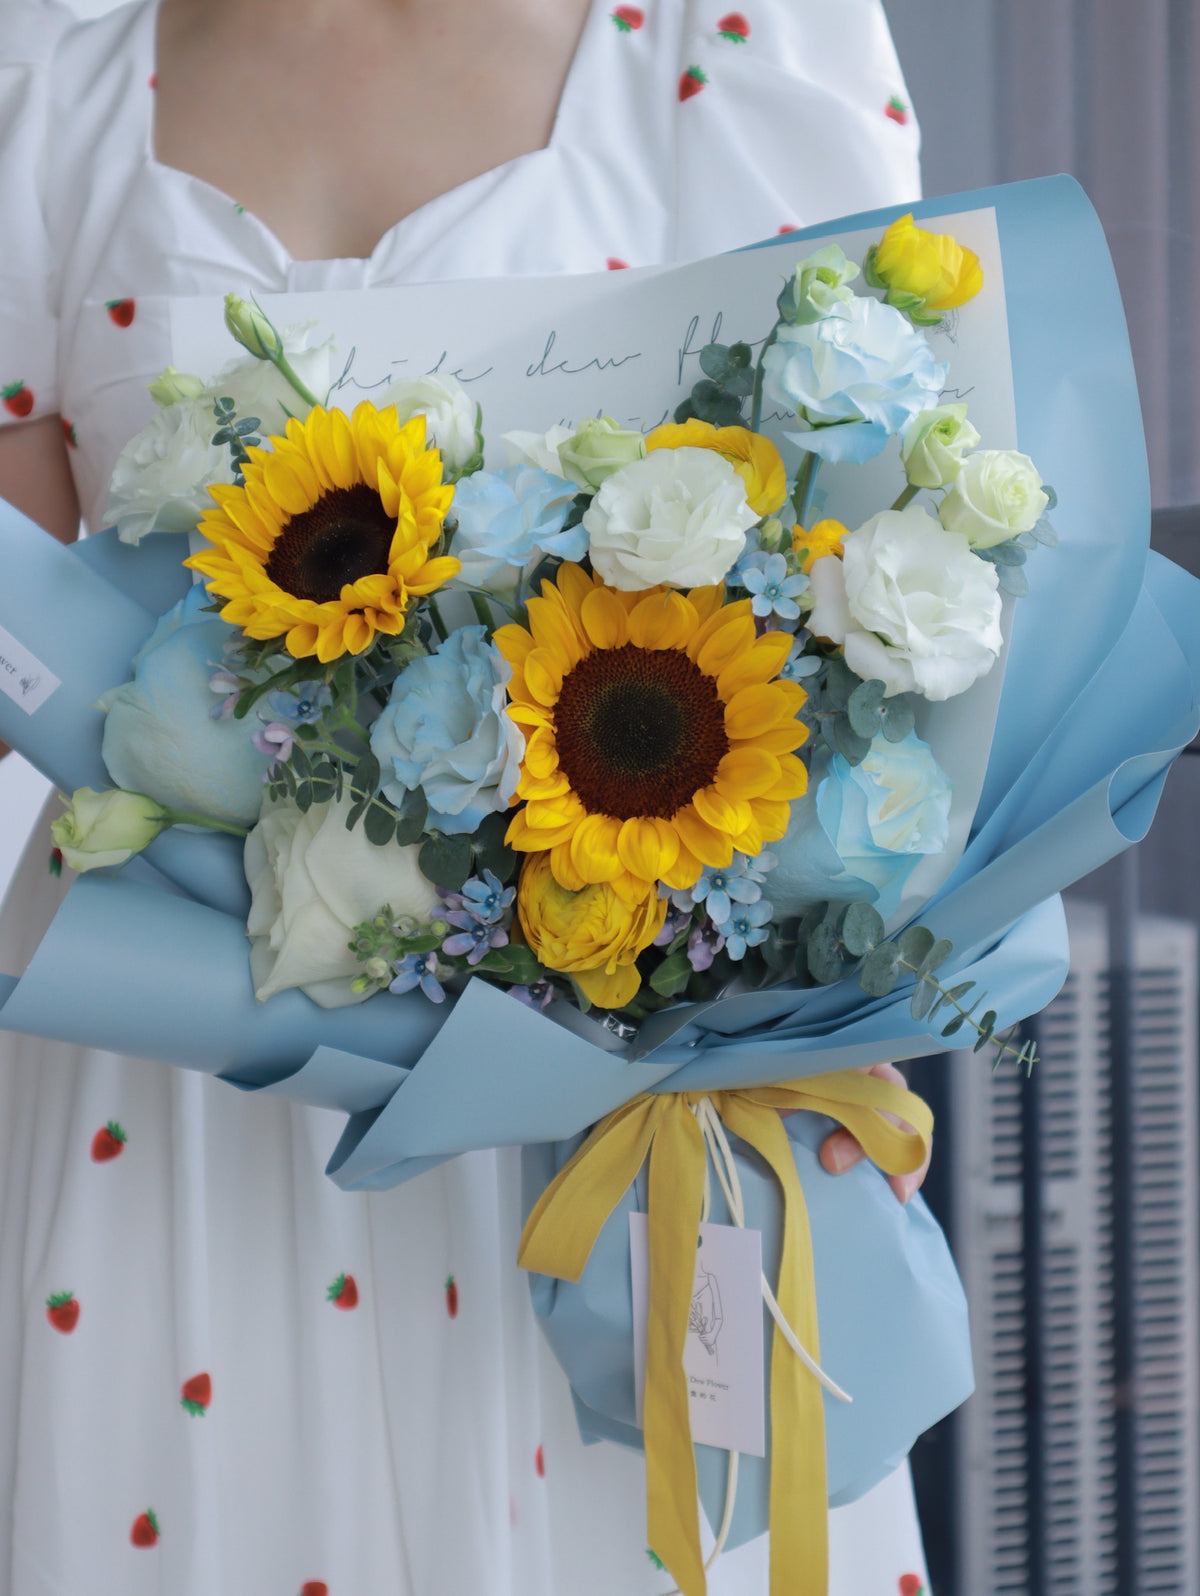 sunflowers with blue flowers  bouquet buy